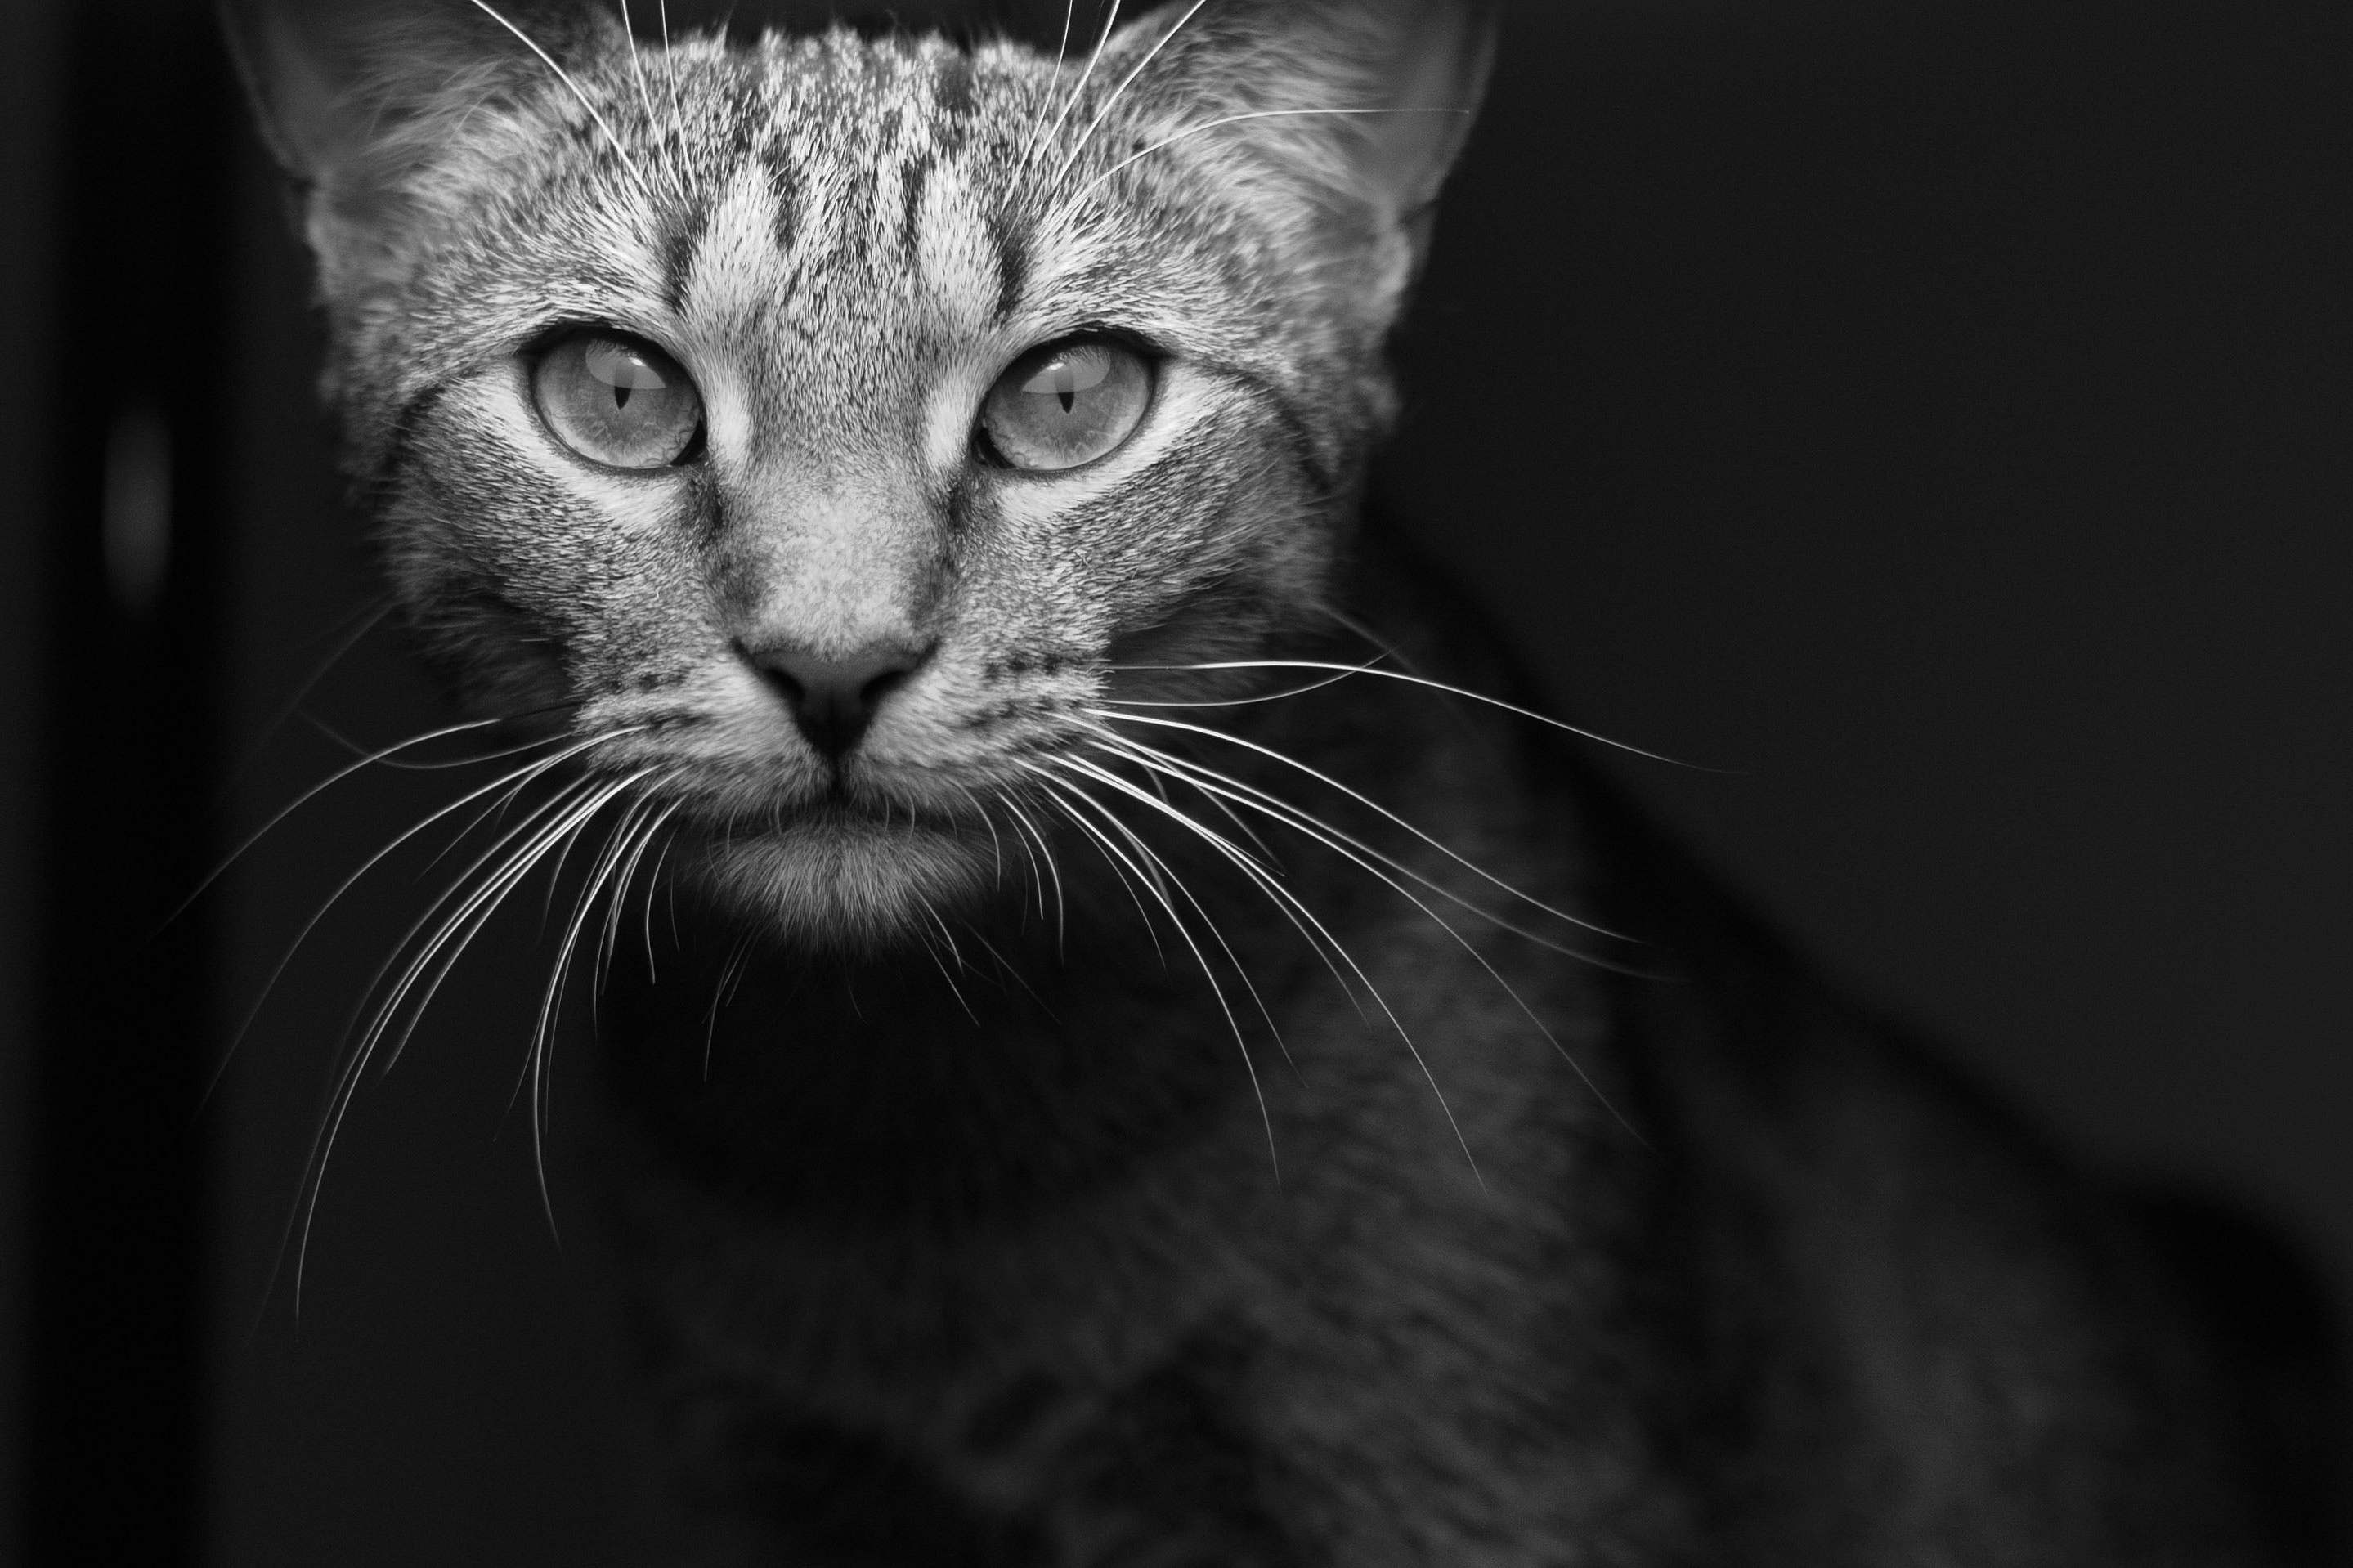 Black-and-white Grayscale Photography Of Tabby Cat Cat Image Free Photo